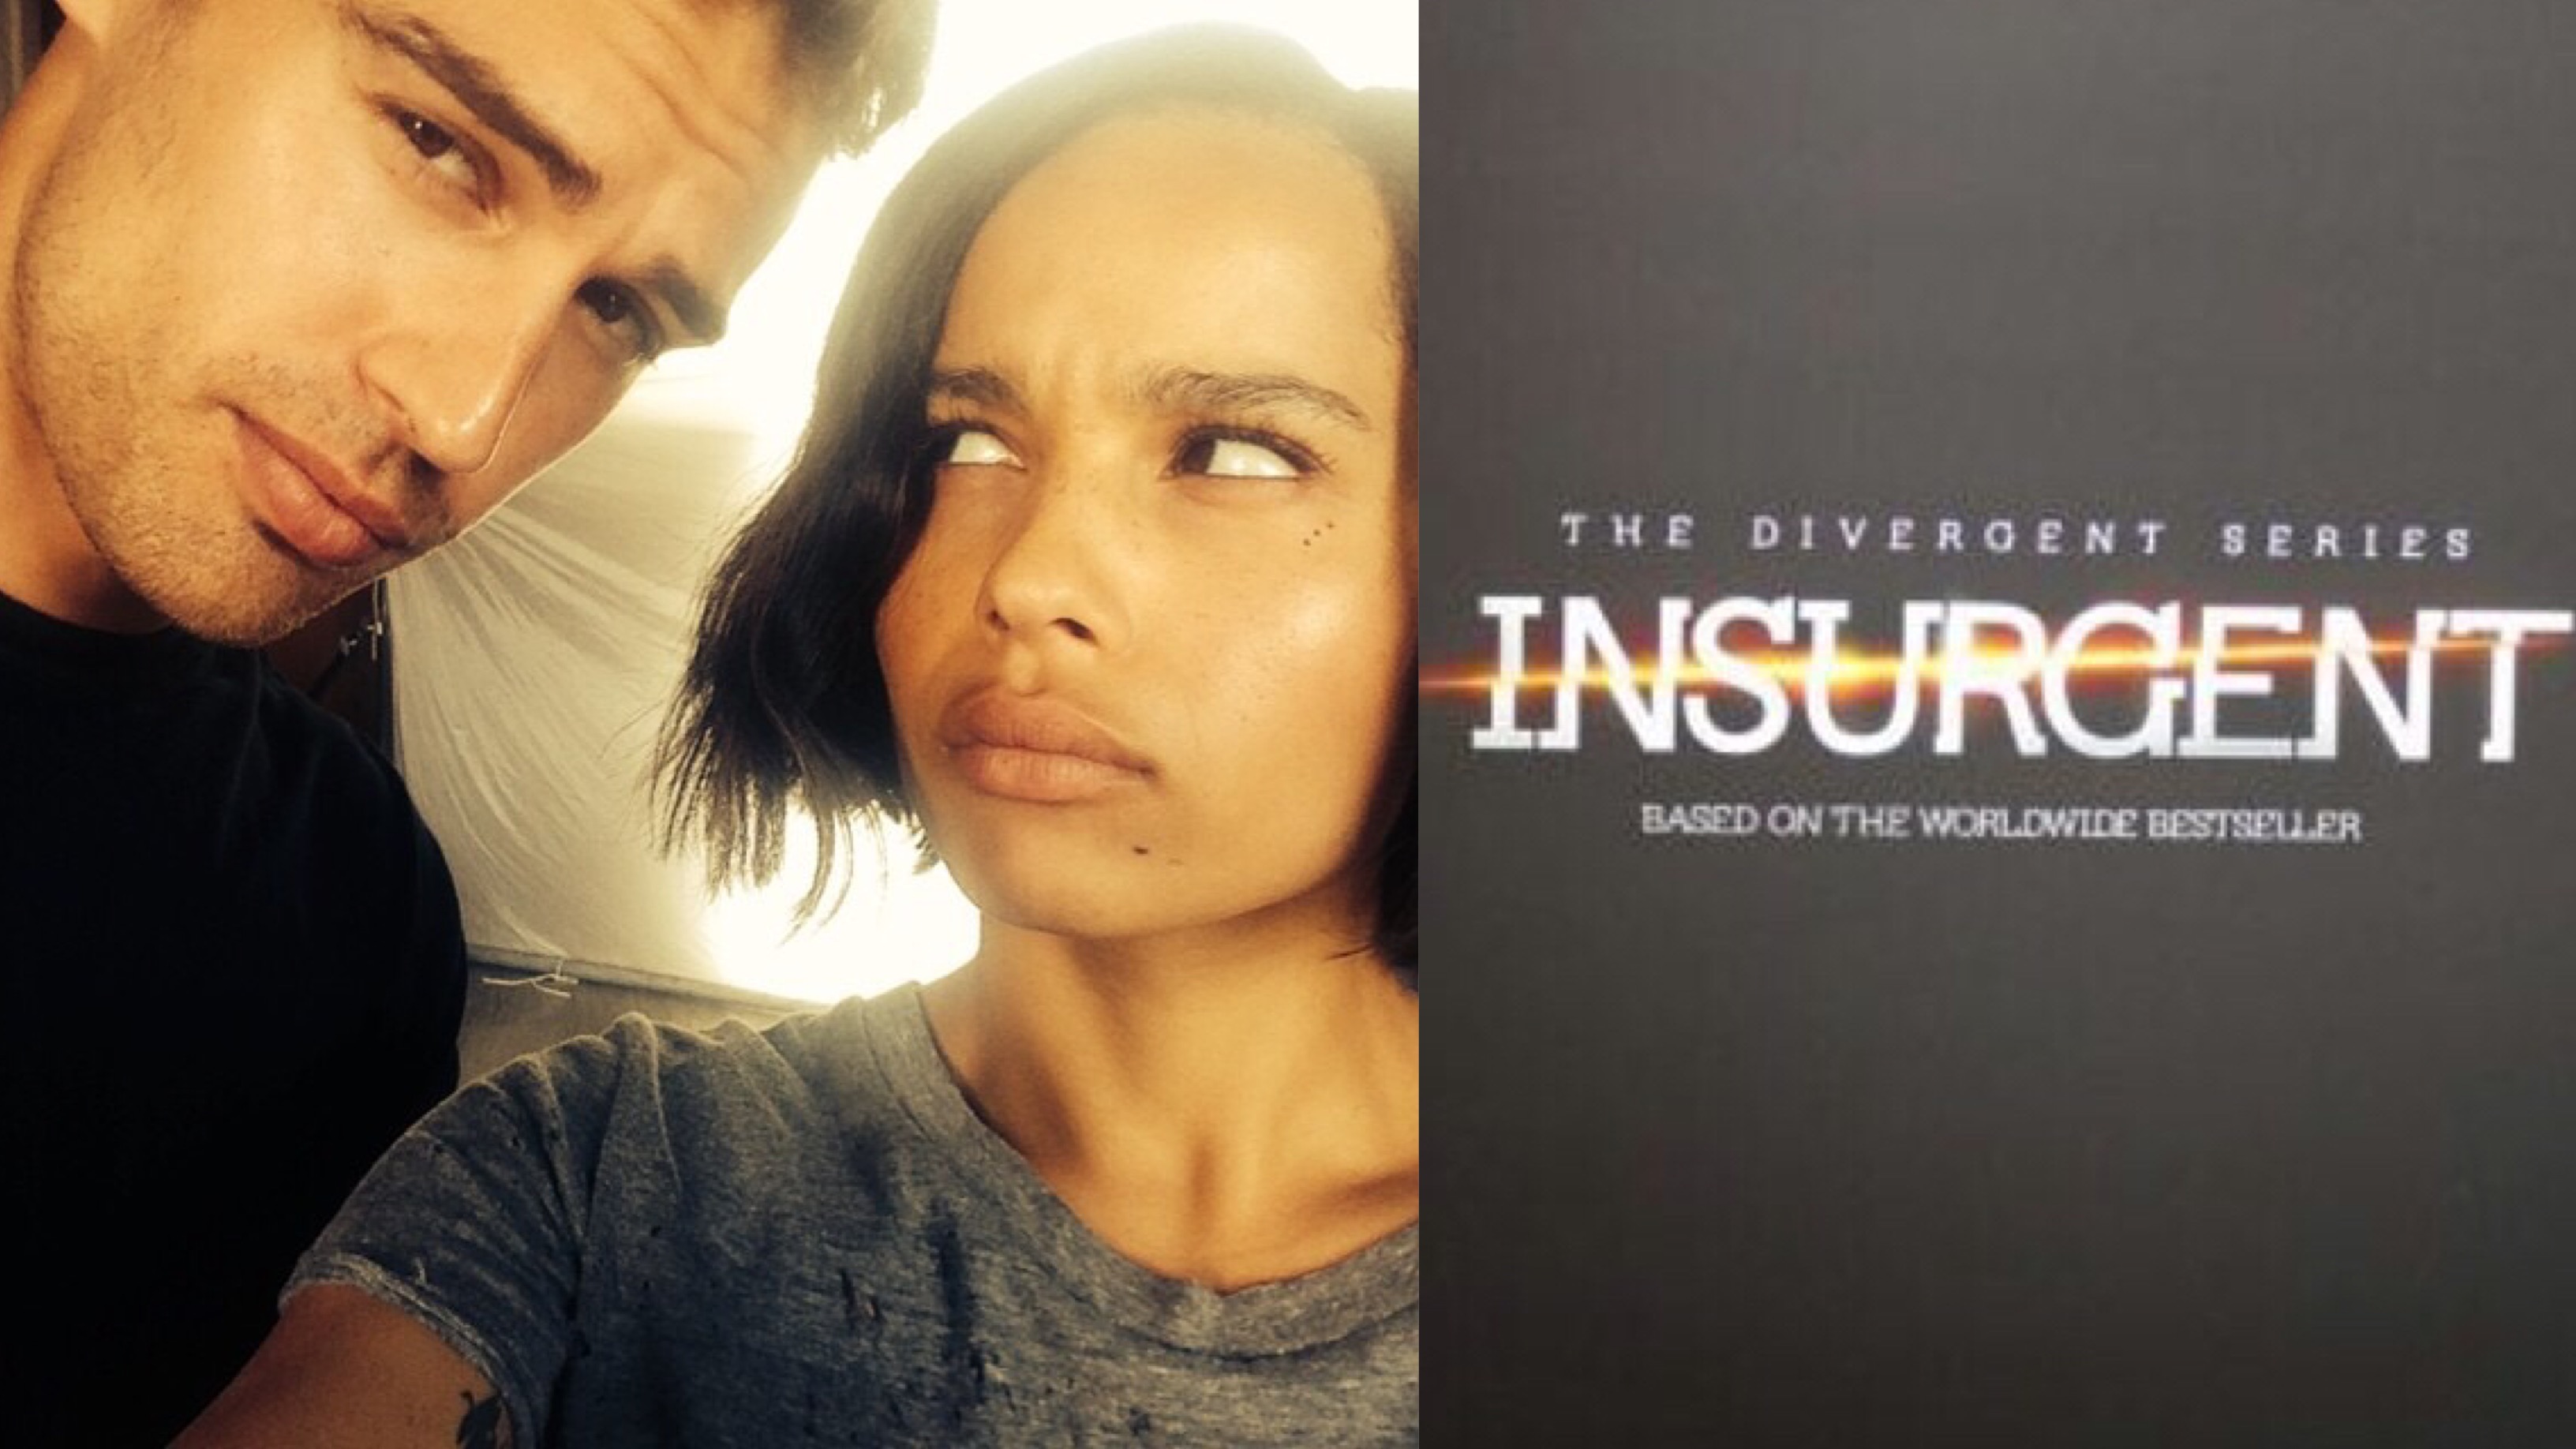 Photo: Zoe Kravitz Shares Picture of Her and Theo James on Insurgent Set